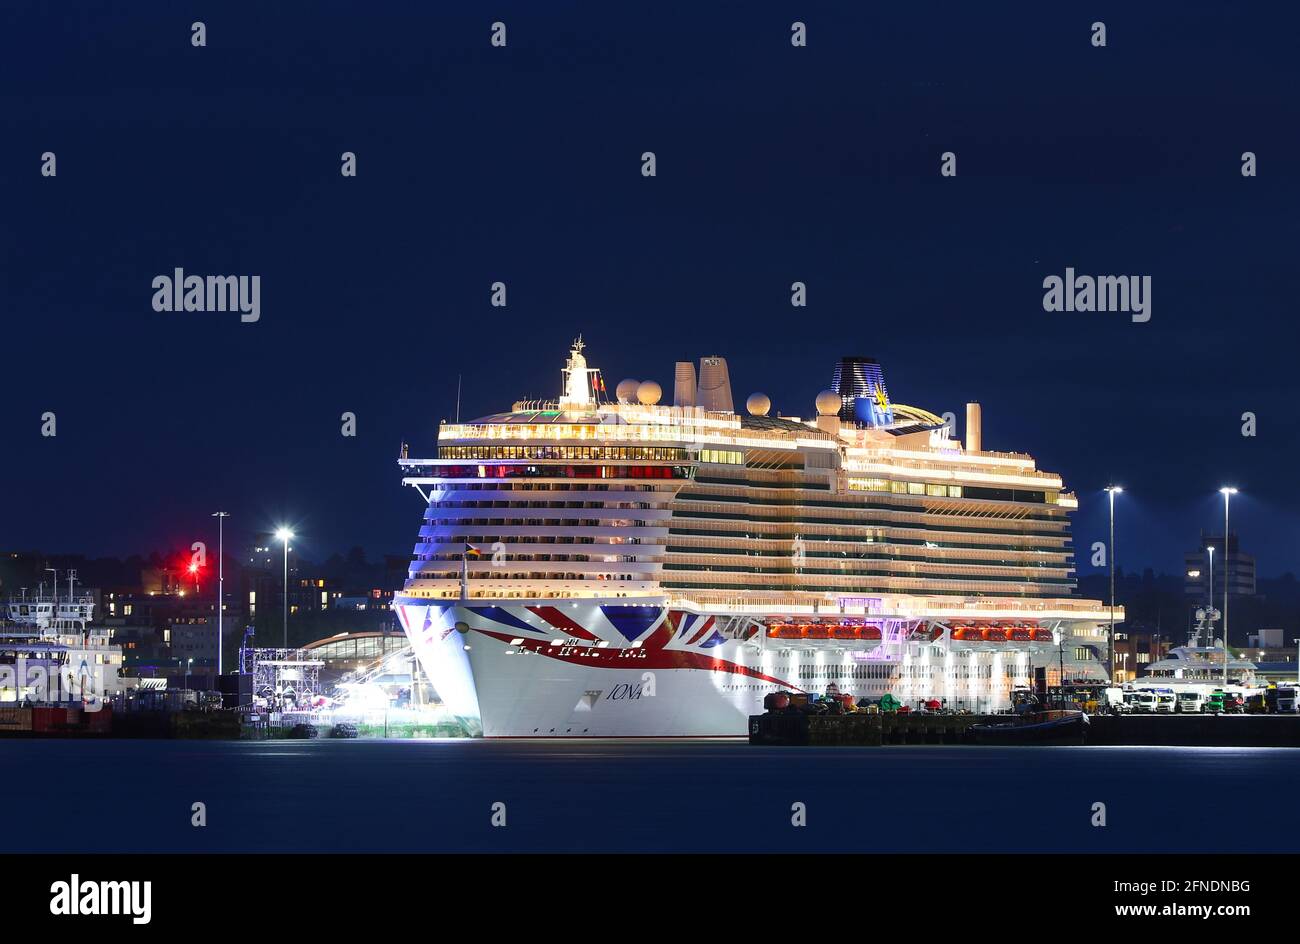 Southampton, Hampshire, UK. 16th May 2021. New P&O cruise ship Iona during her naming ceremony in Southampton Docks. At 344 metres long, Iona is Britain’s largest cruise ship.  Credit Stuart Martin/Alamy Live News Stock Photo